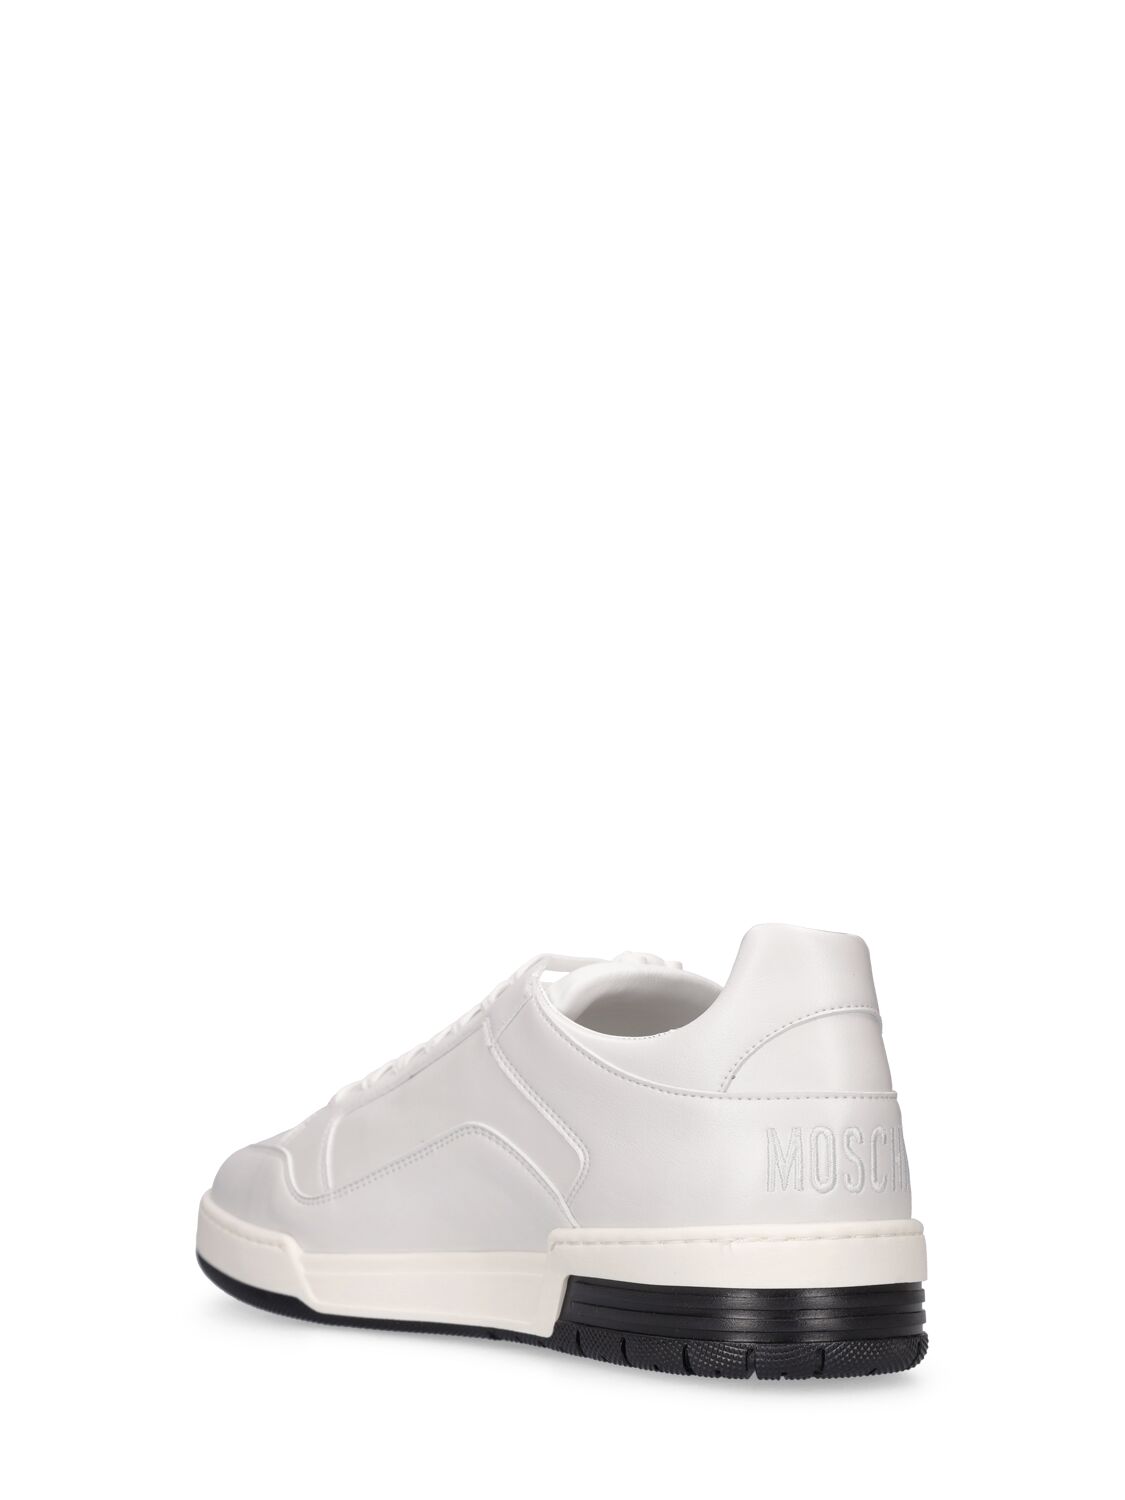 Shop Moschino Teddy Faux Leather Low Top Sneakers In White